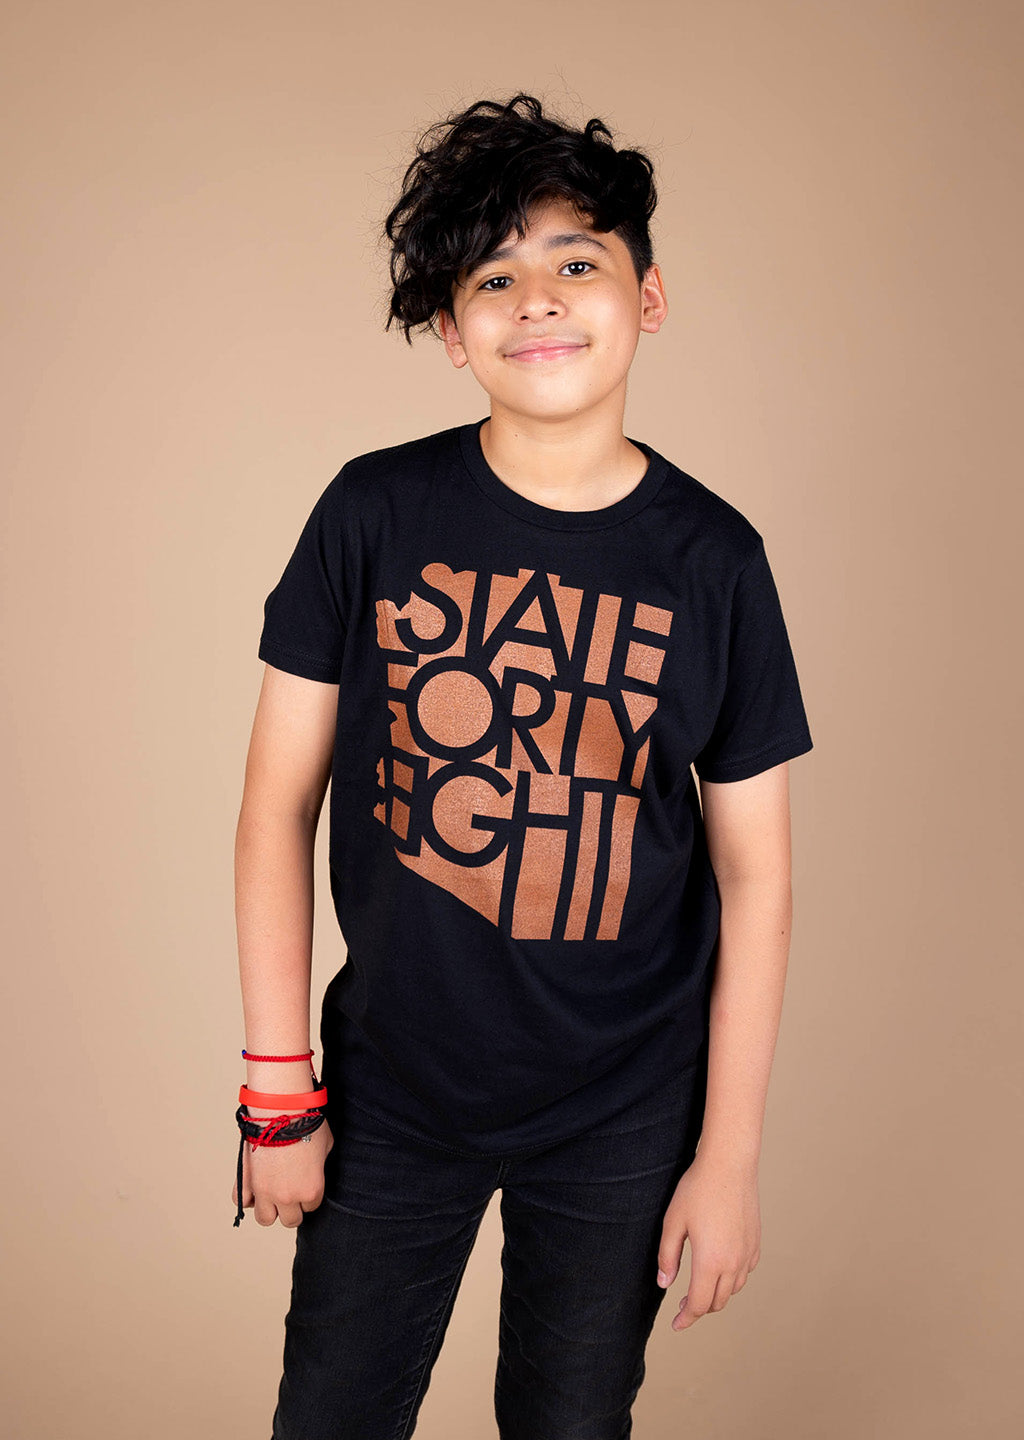 State Forty Eight Kids' Tee - Black & Copper